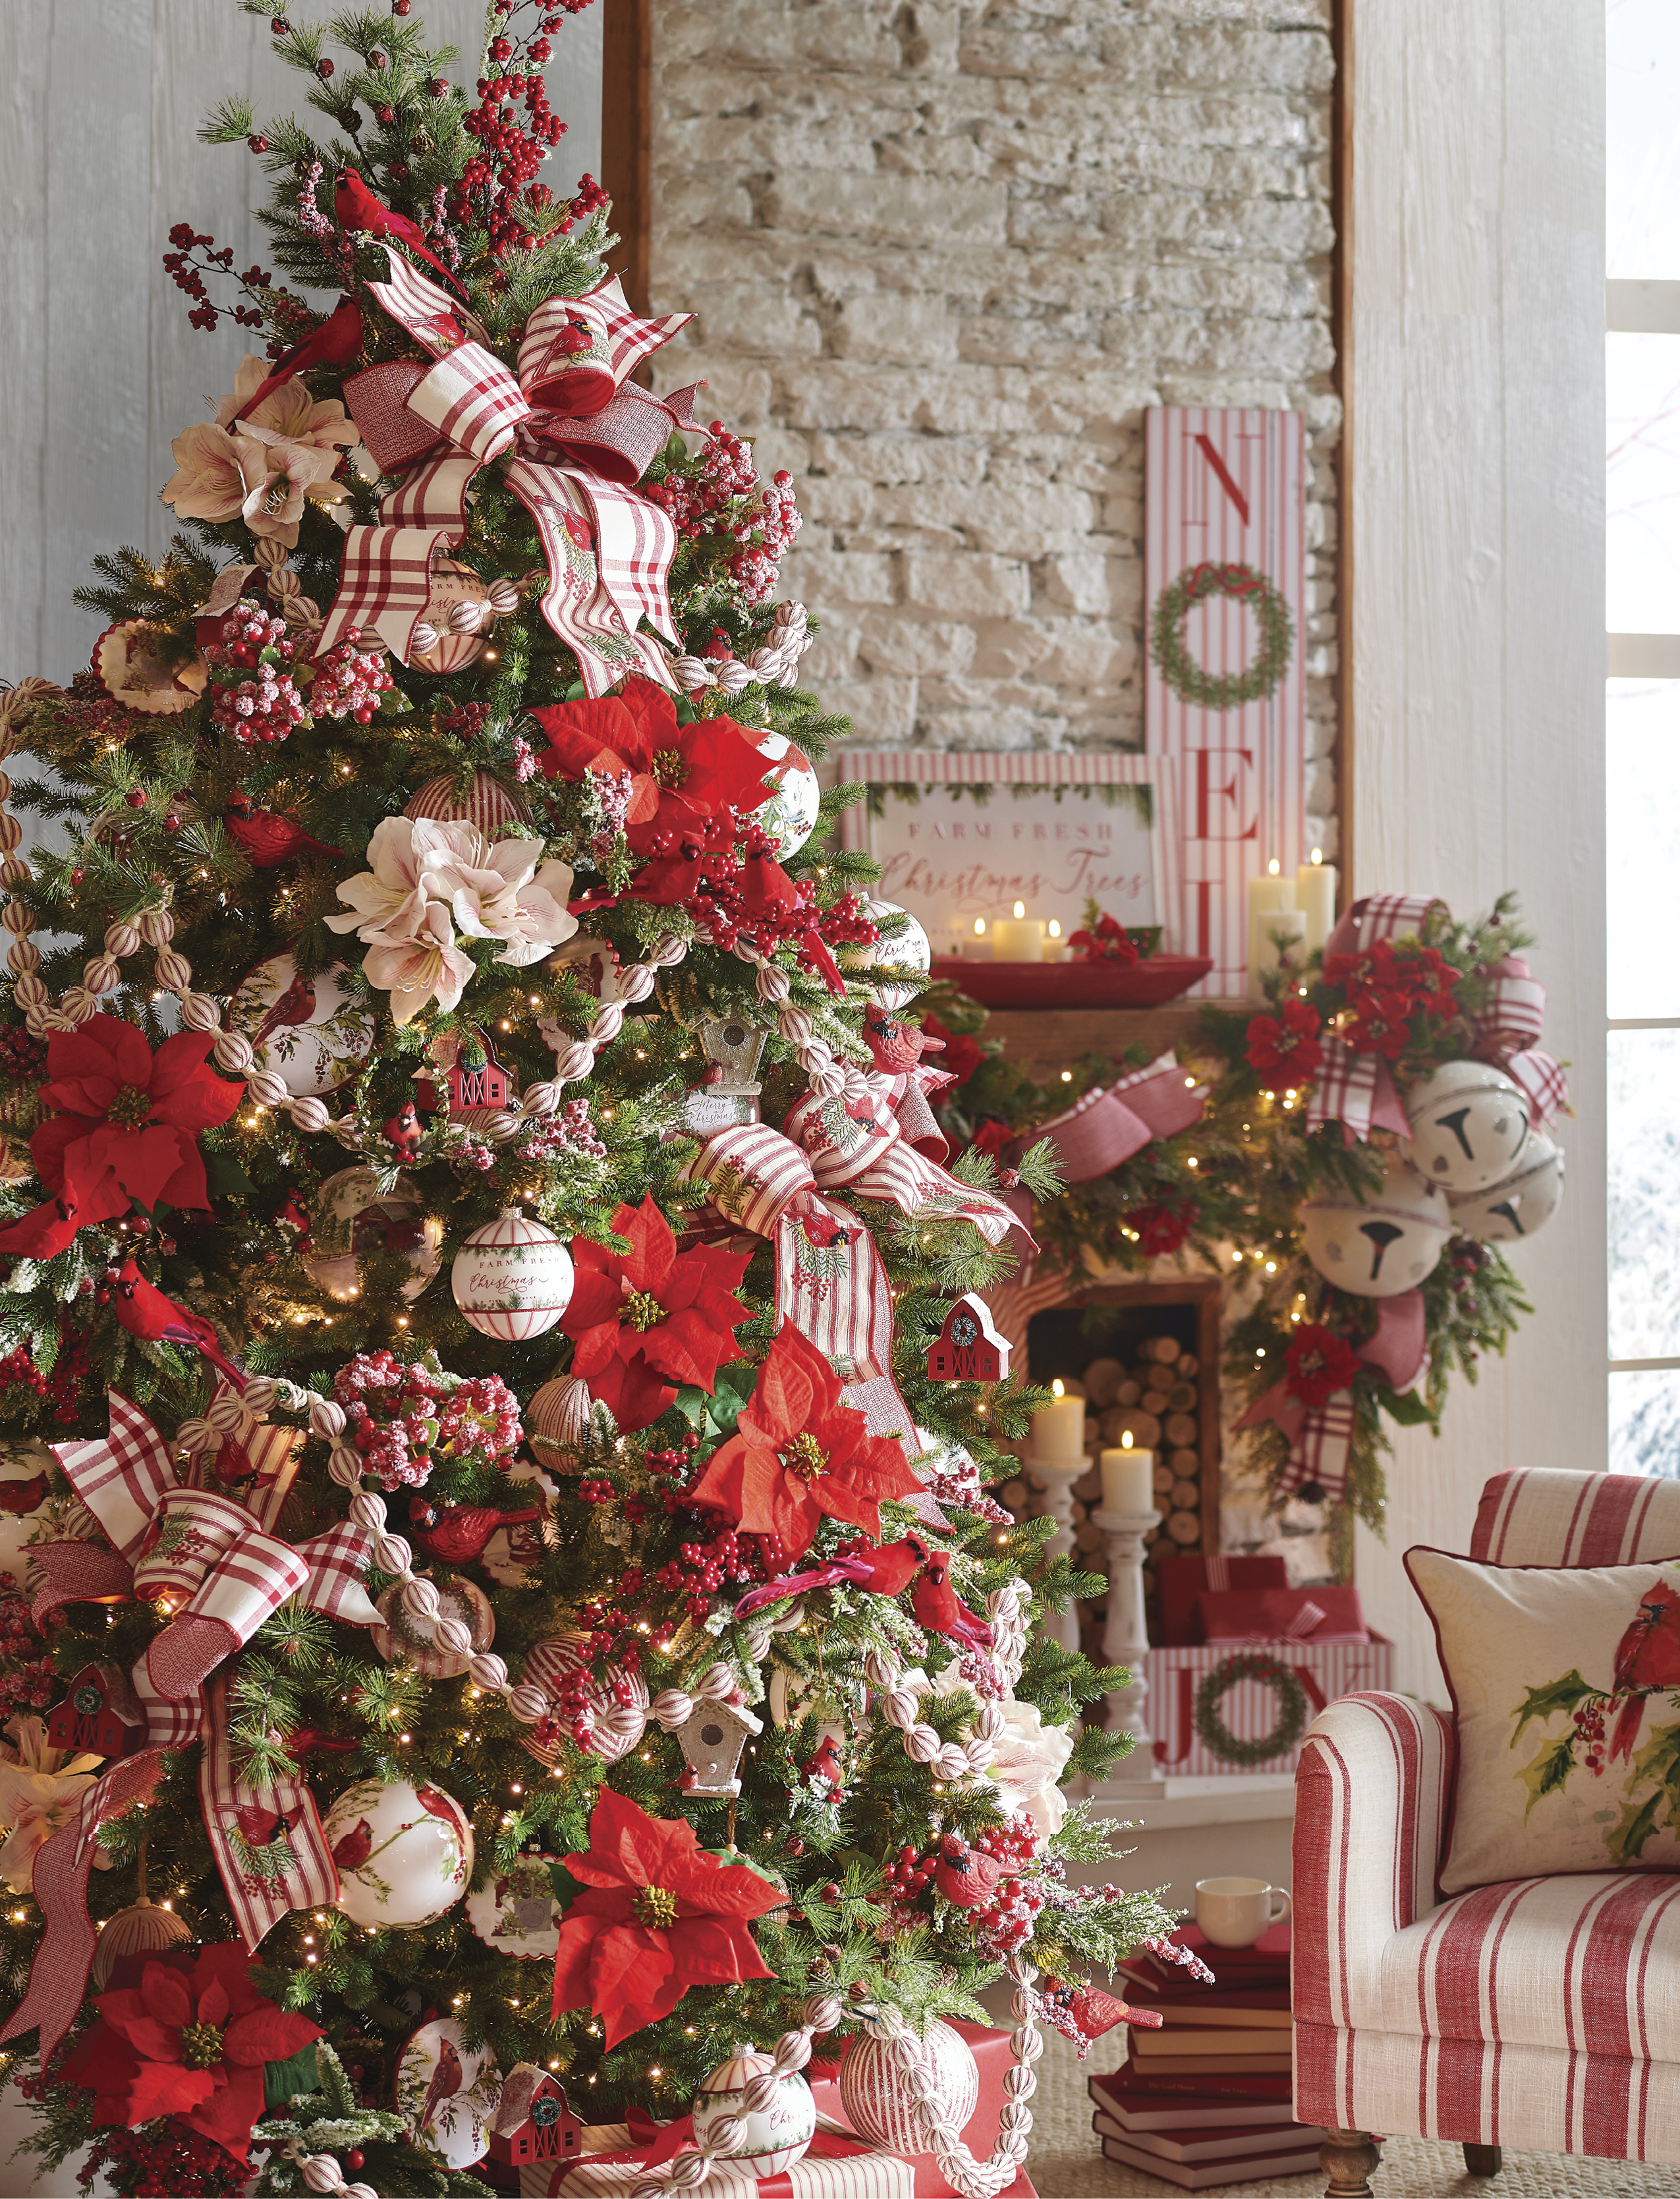 Style at Home: The art of designing a Christmas tree